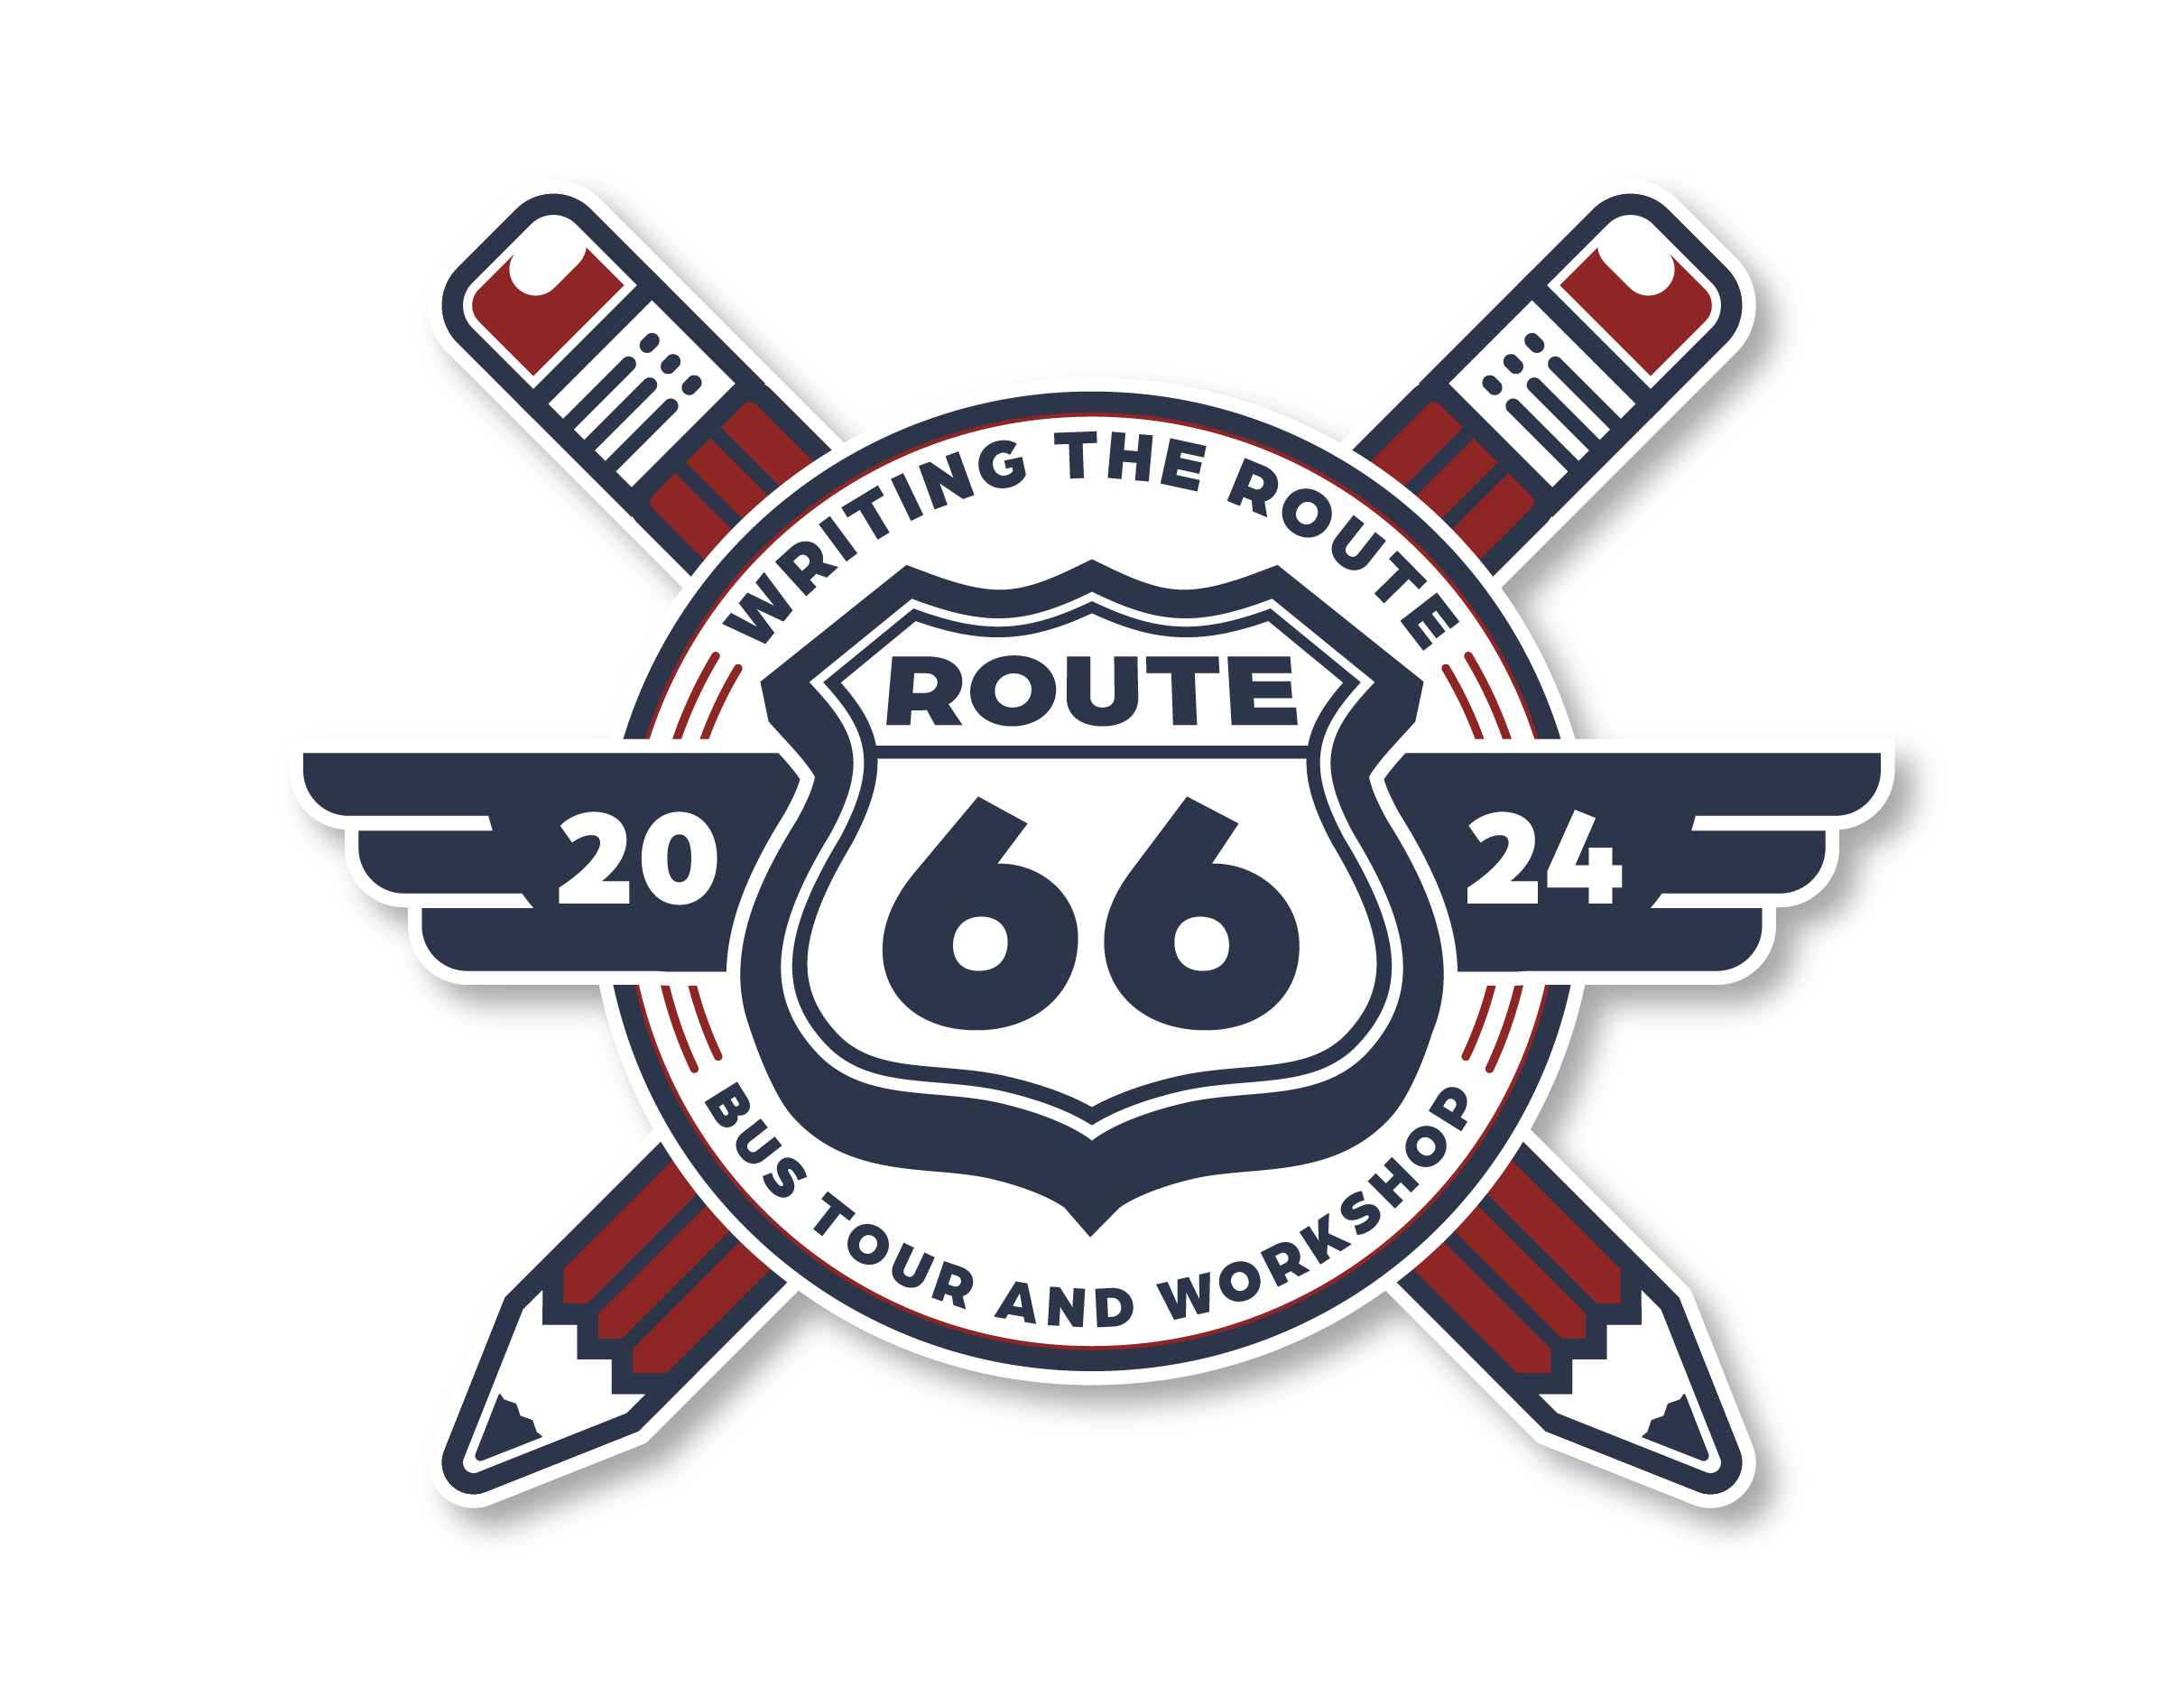 Logo for the "Writing the Route" workshop, two pencils crossed behind a Route 66 sign